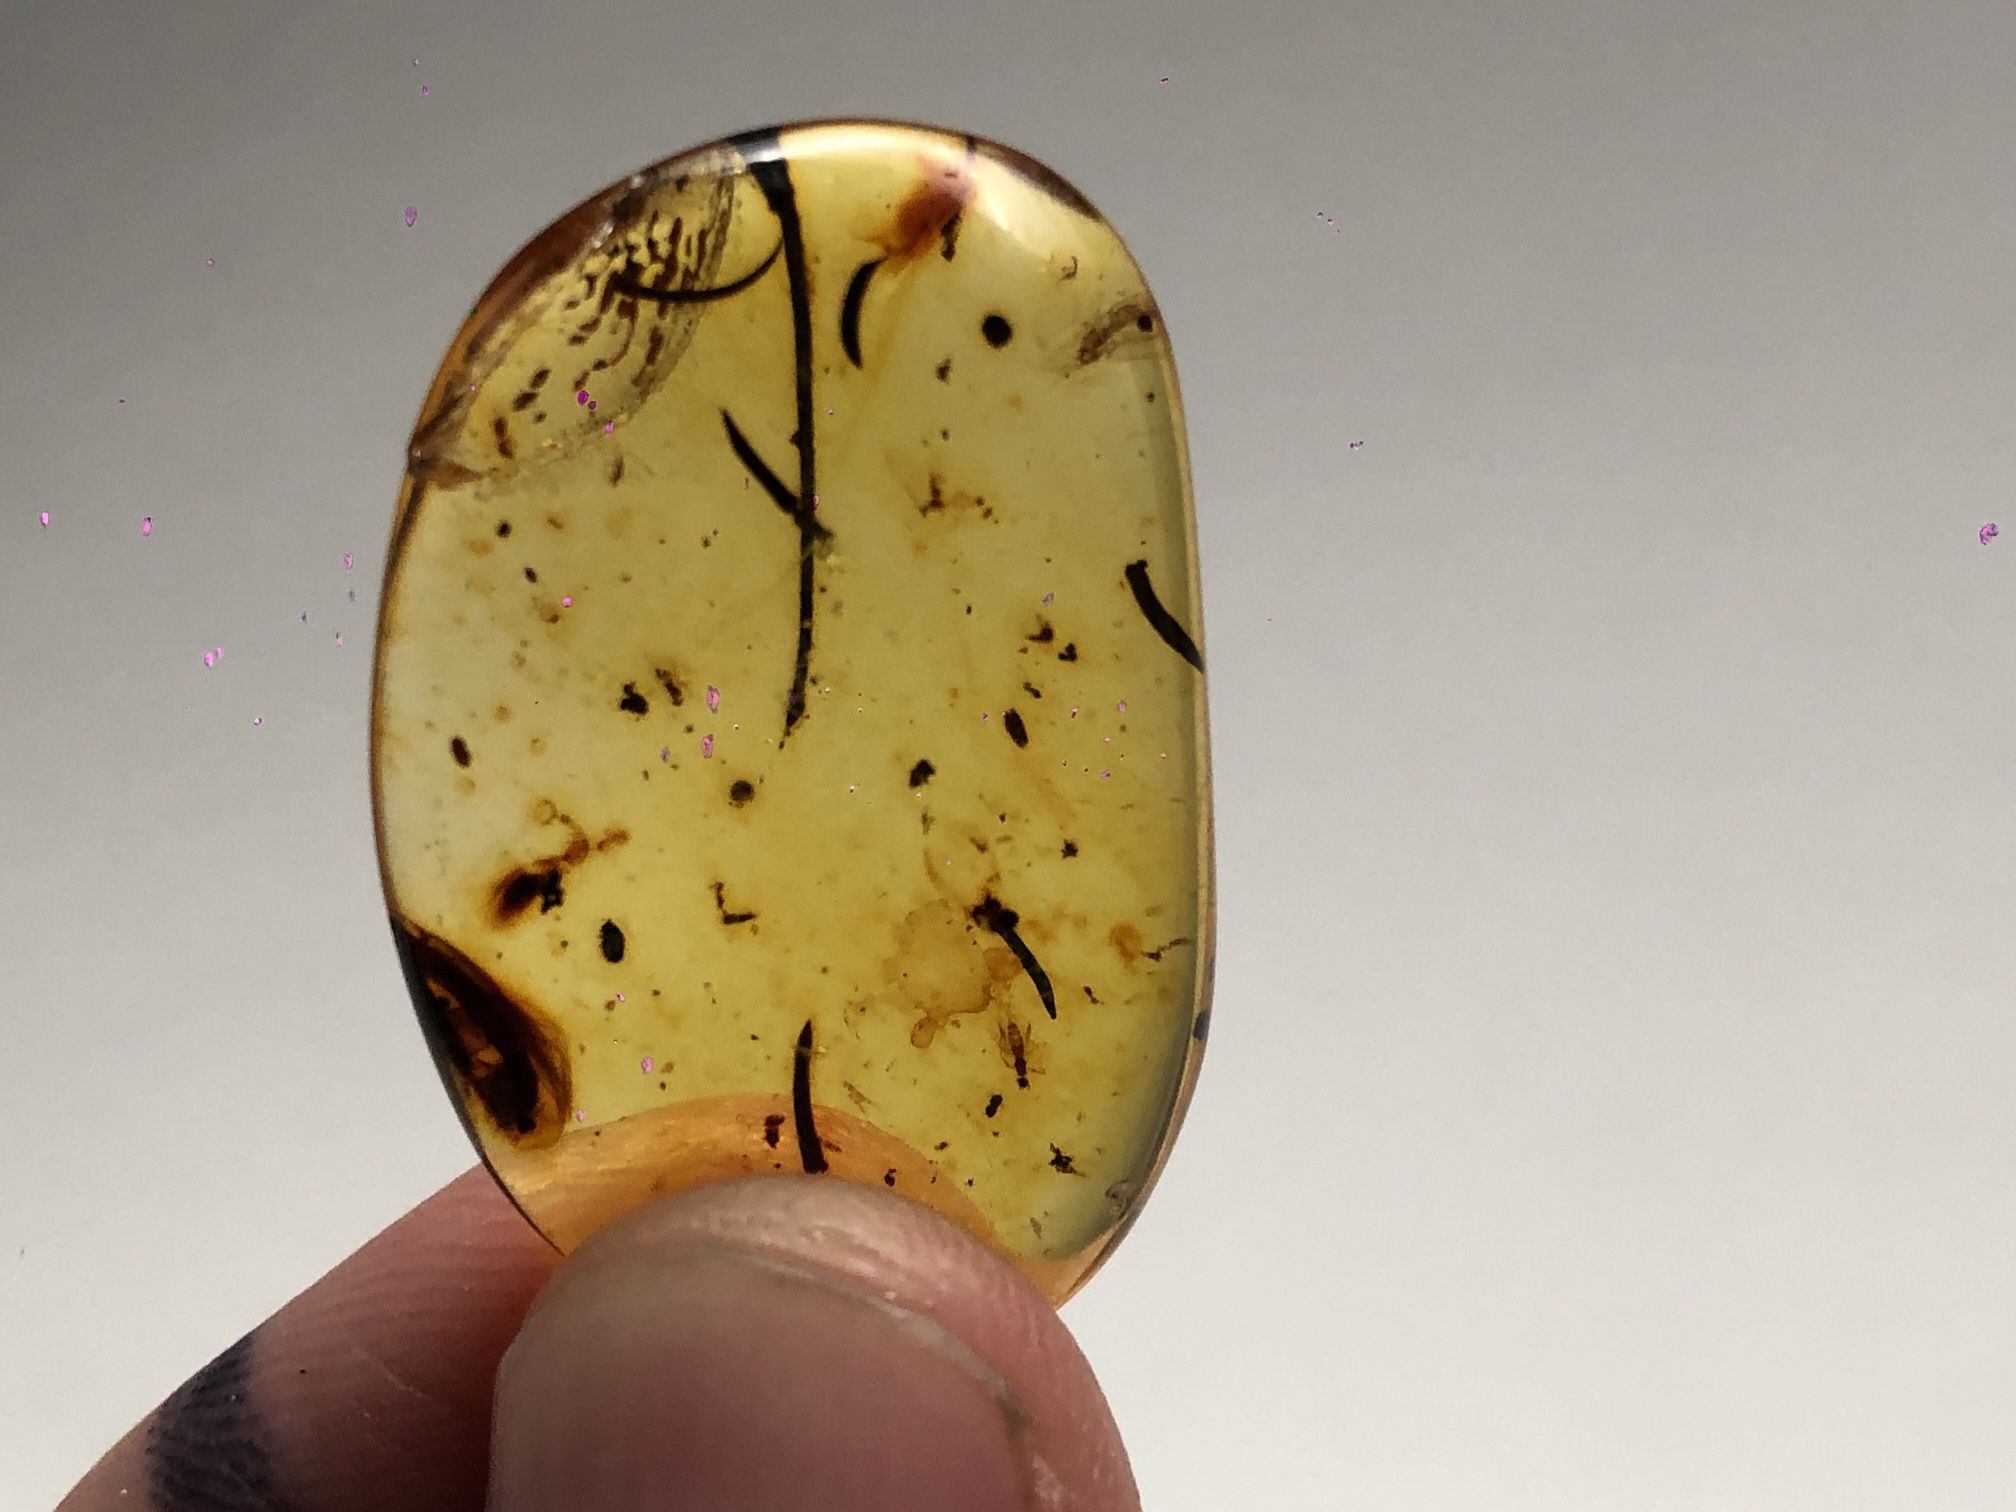 Fine Polished Columbian Amber with Two Insects and Ancient Organic Matter - Repaired